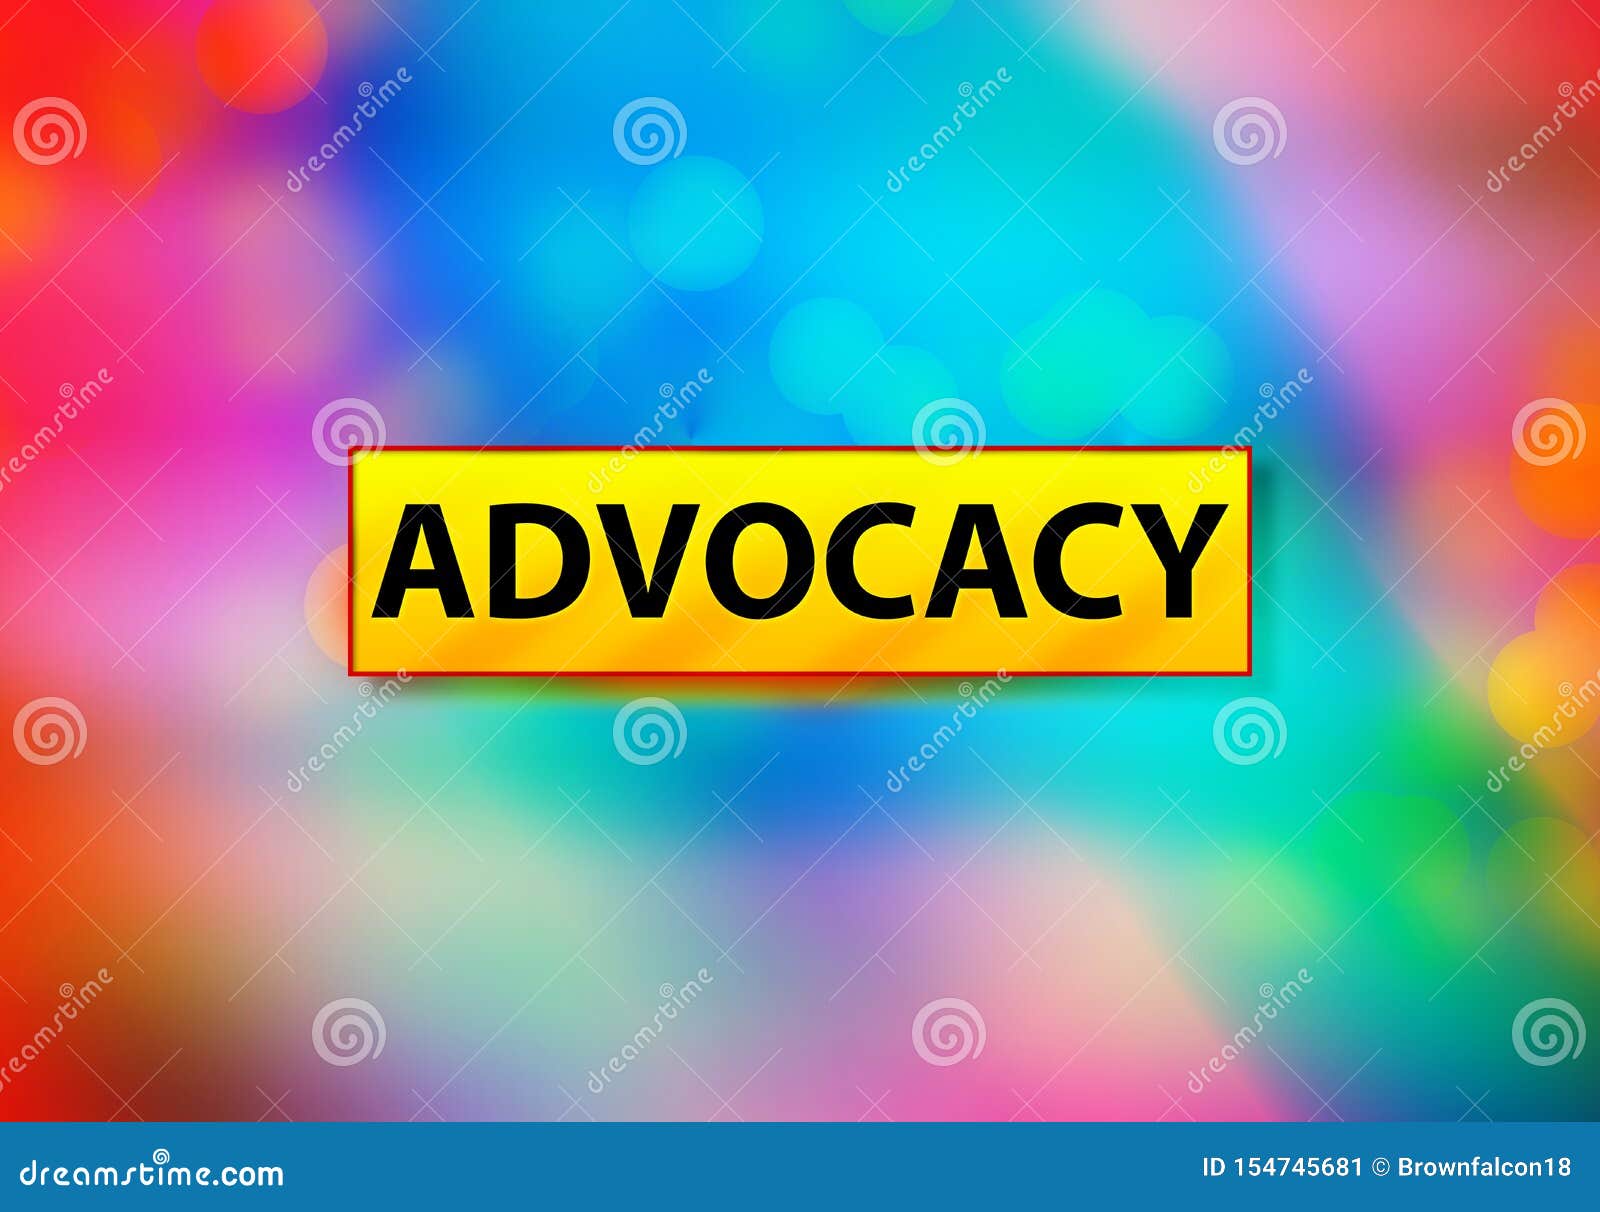 advocacy abstract colorful background bokeh  